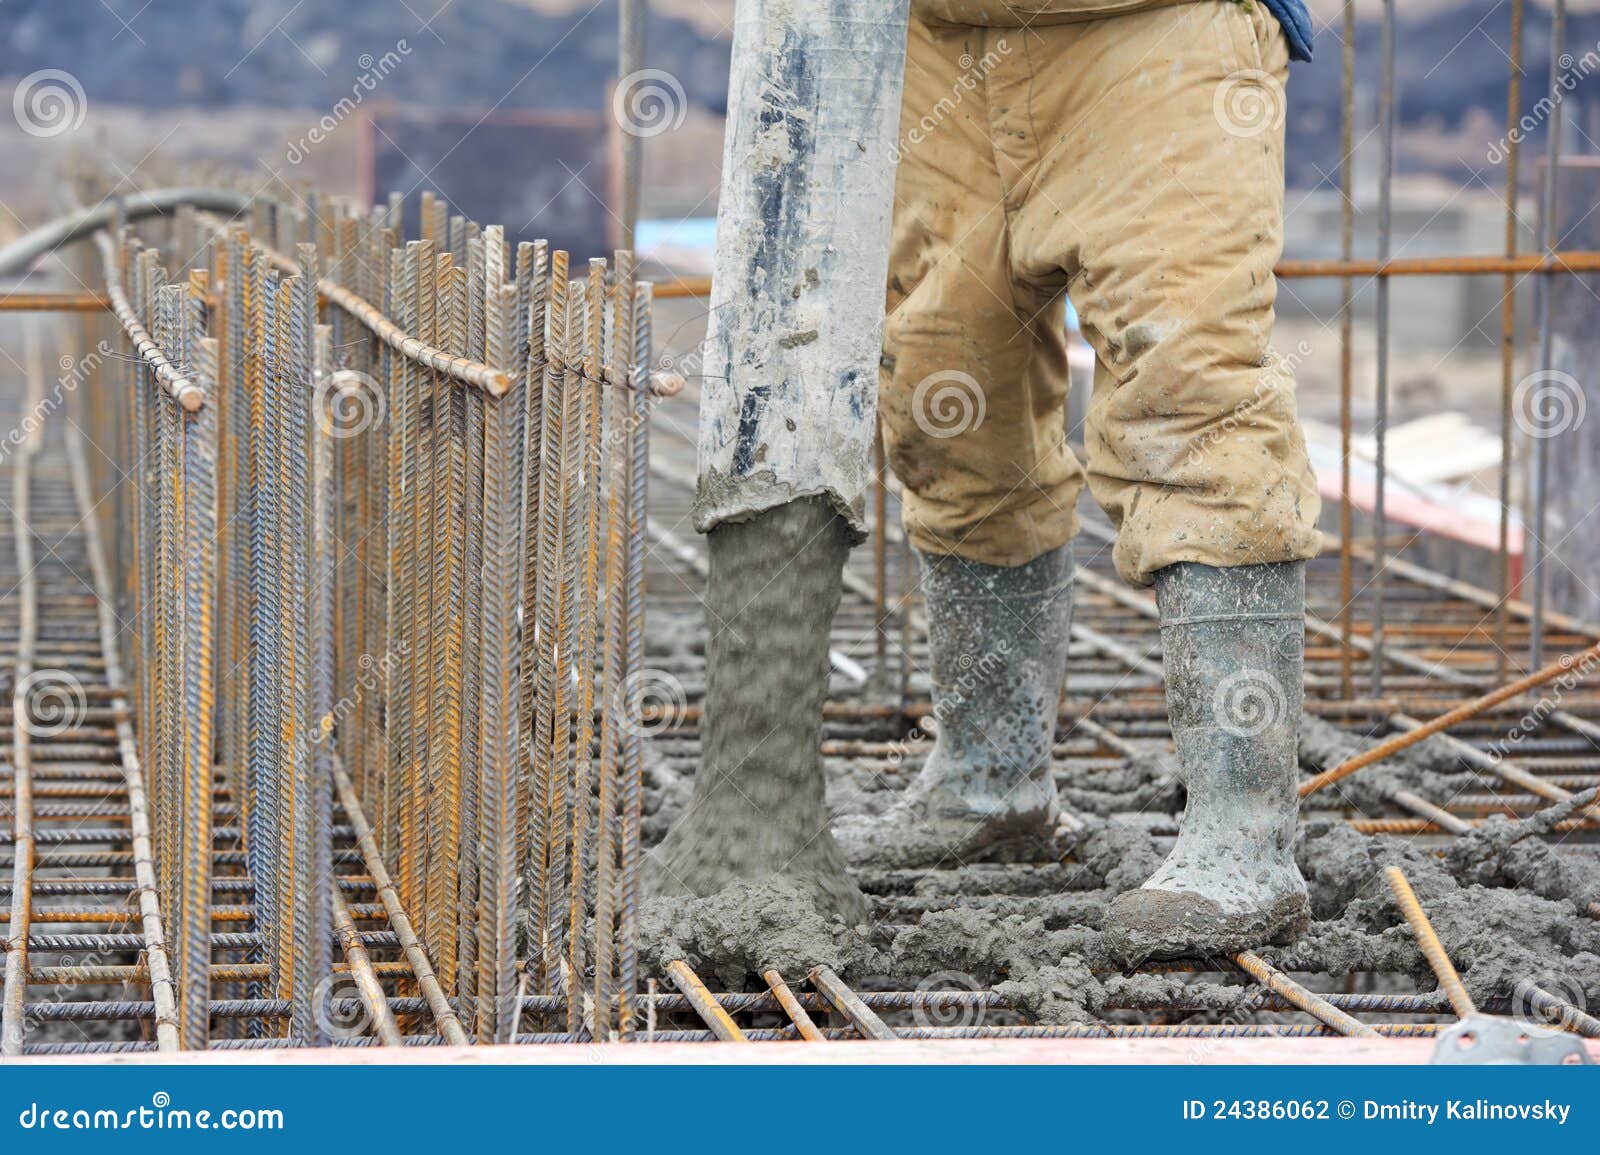 Builder Worker Pouring Concrete Into Form Stock Photography - Image